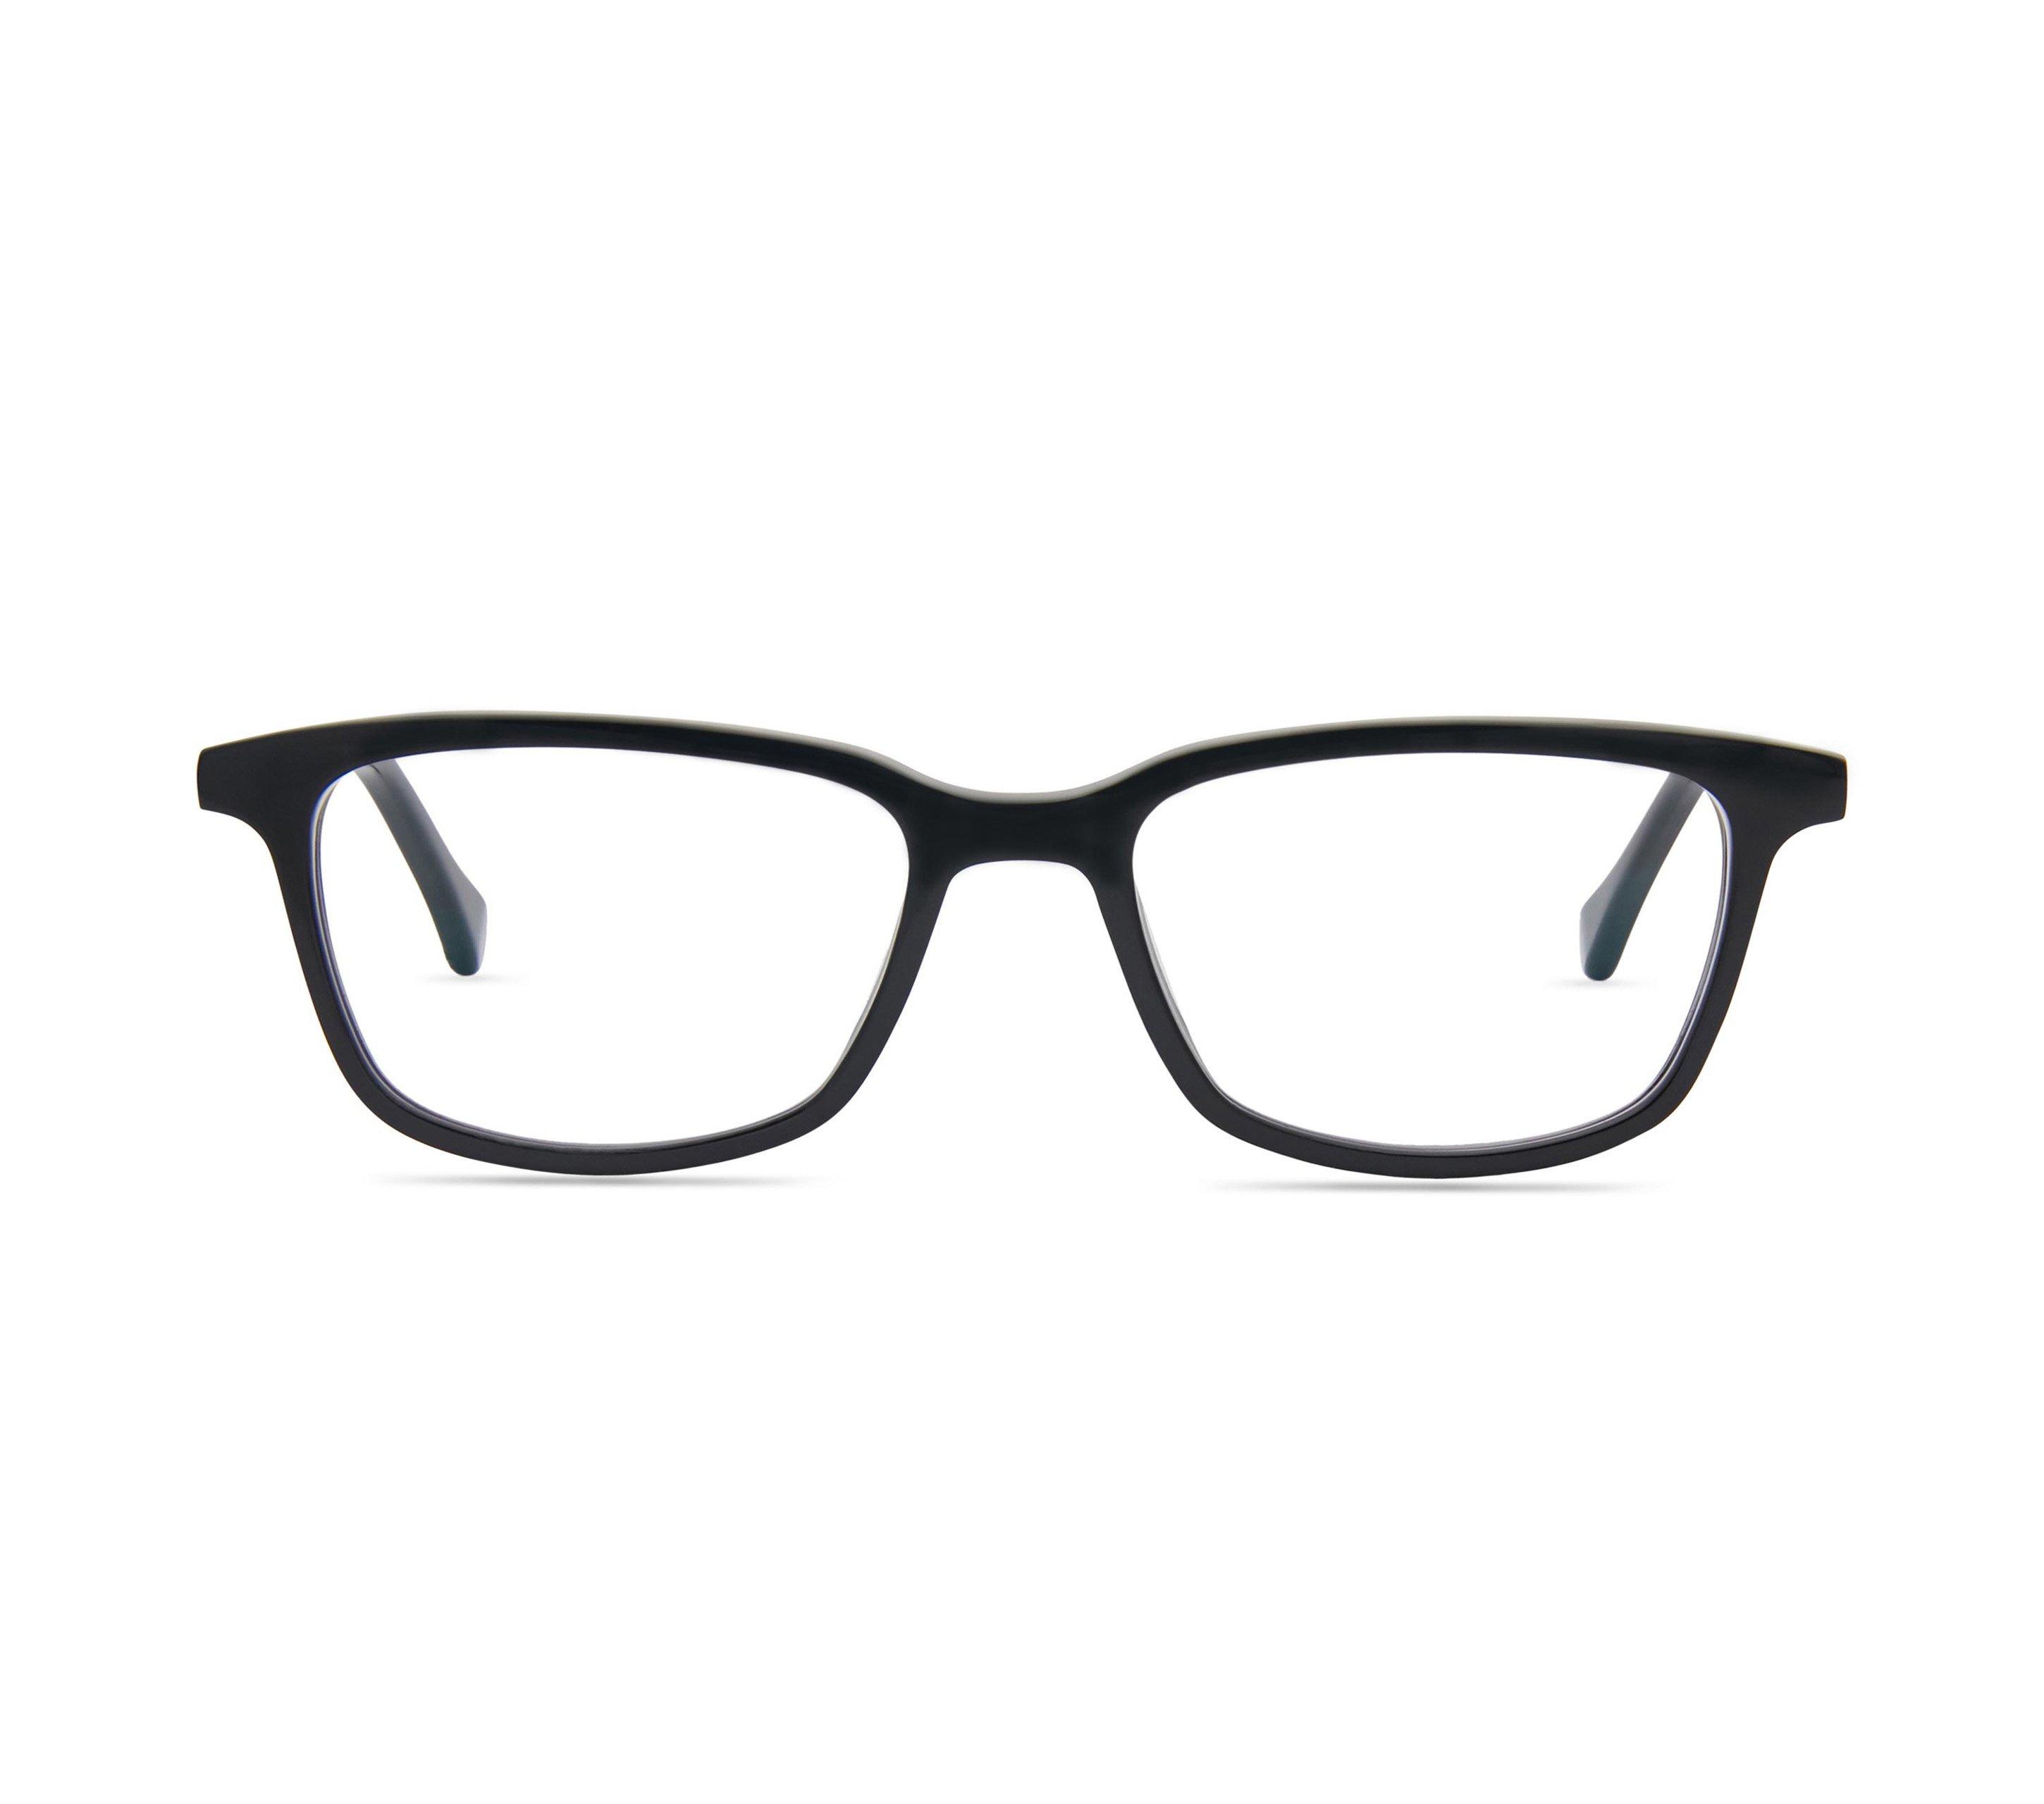 list item 3 of 6 Felix Gray Faraday Small Frame Blue Light Glasses Size Large for Kids Ages 9-13